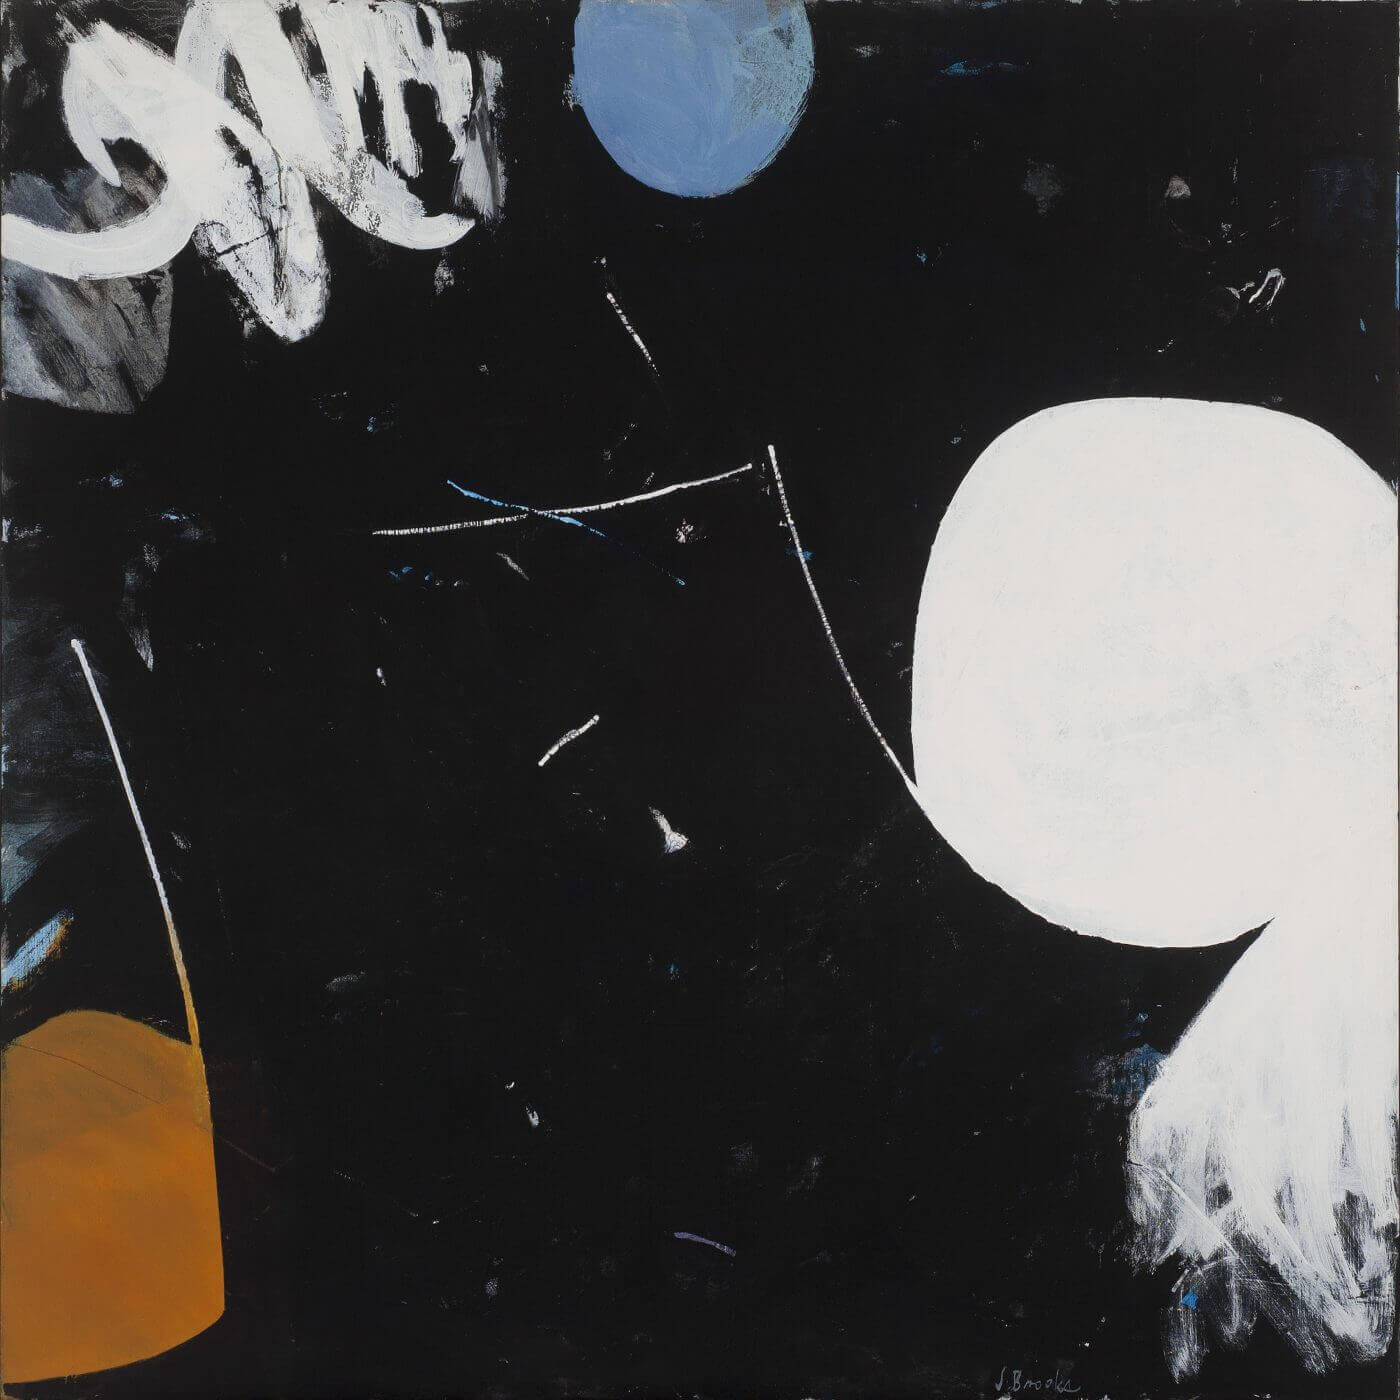 James Brooks, Diston, 1967, acrylic on canvas, 72 x 72 inches (Parrish Art Museum, Water Mill, NY, Gift of the James and Charlotte Brooks Foundation)